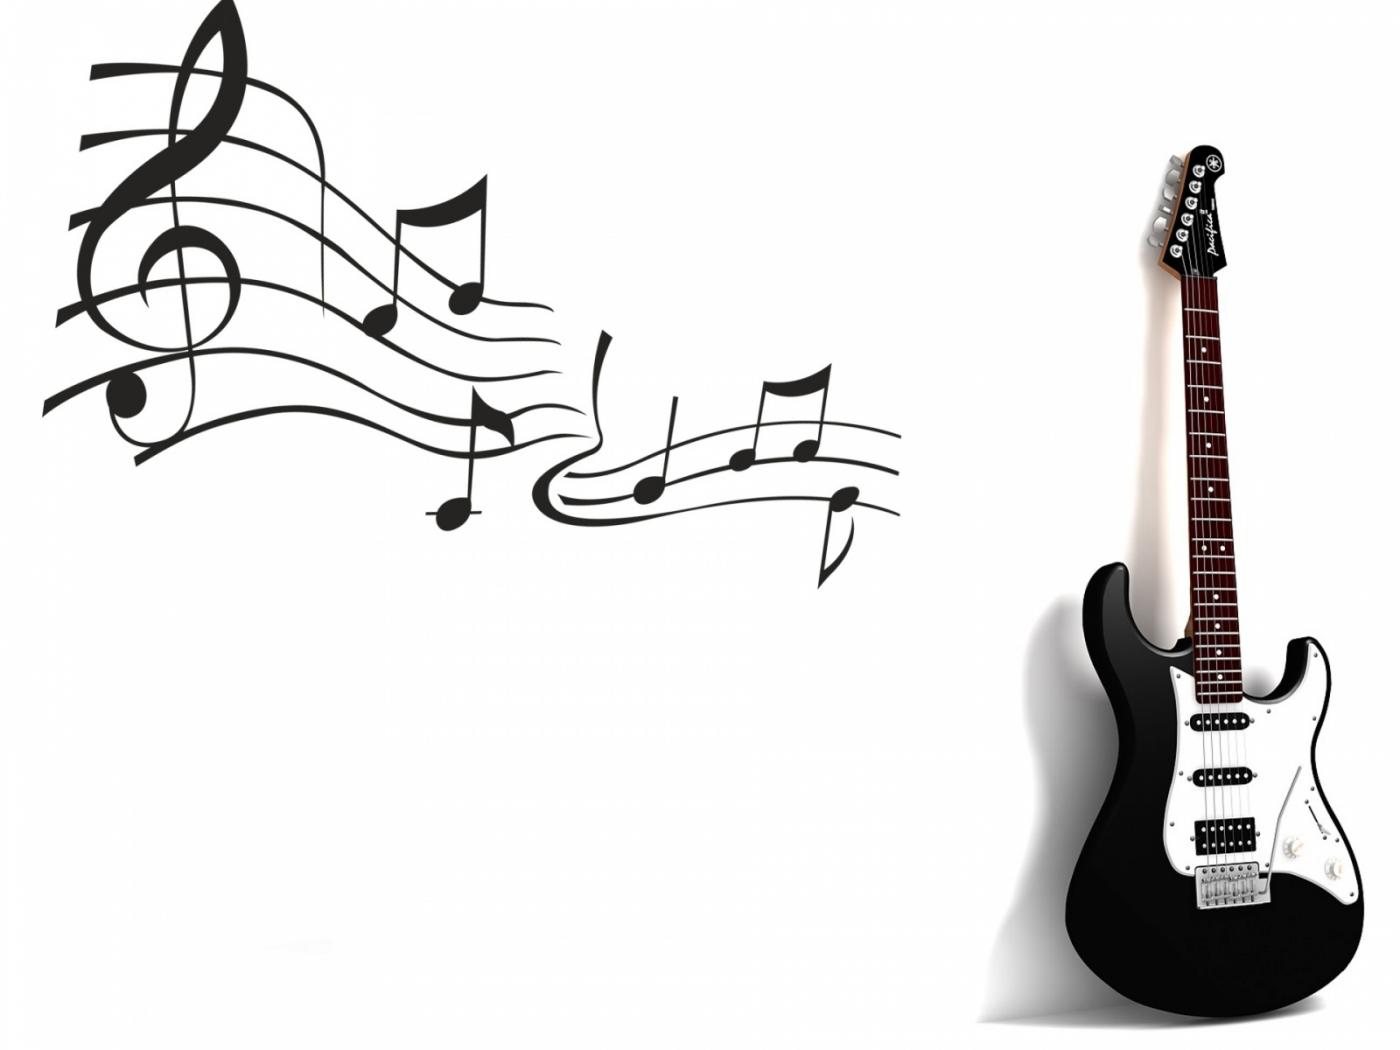 White Hd Wallpapers 1080p - Musical Instruments Photos Download - HD Wallpaper 